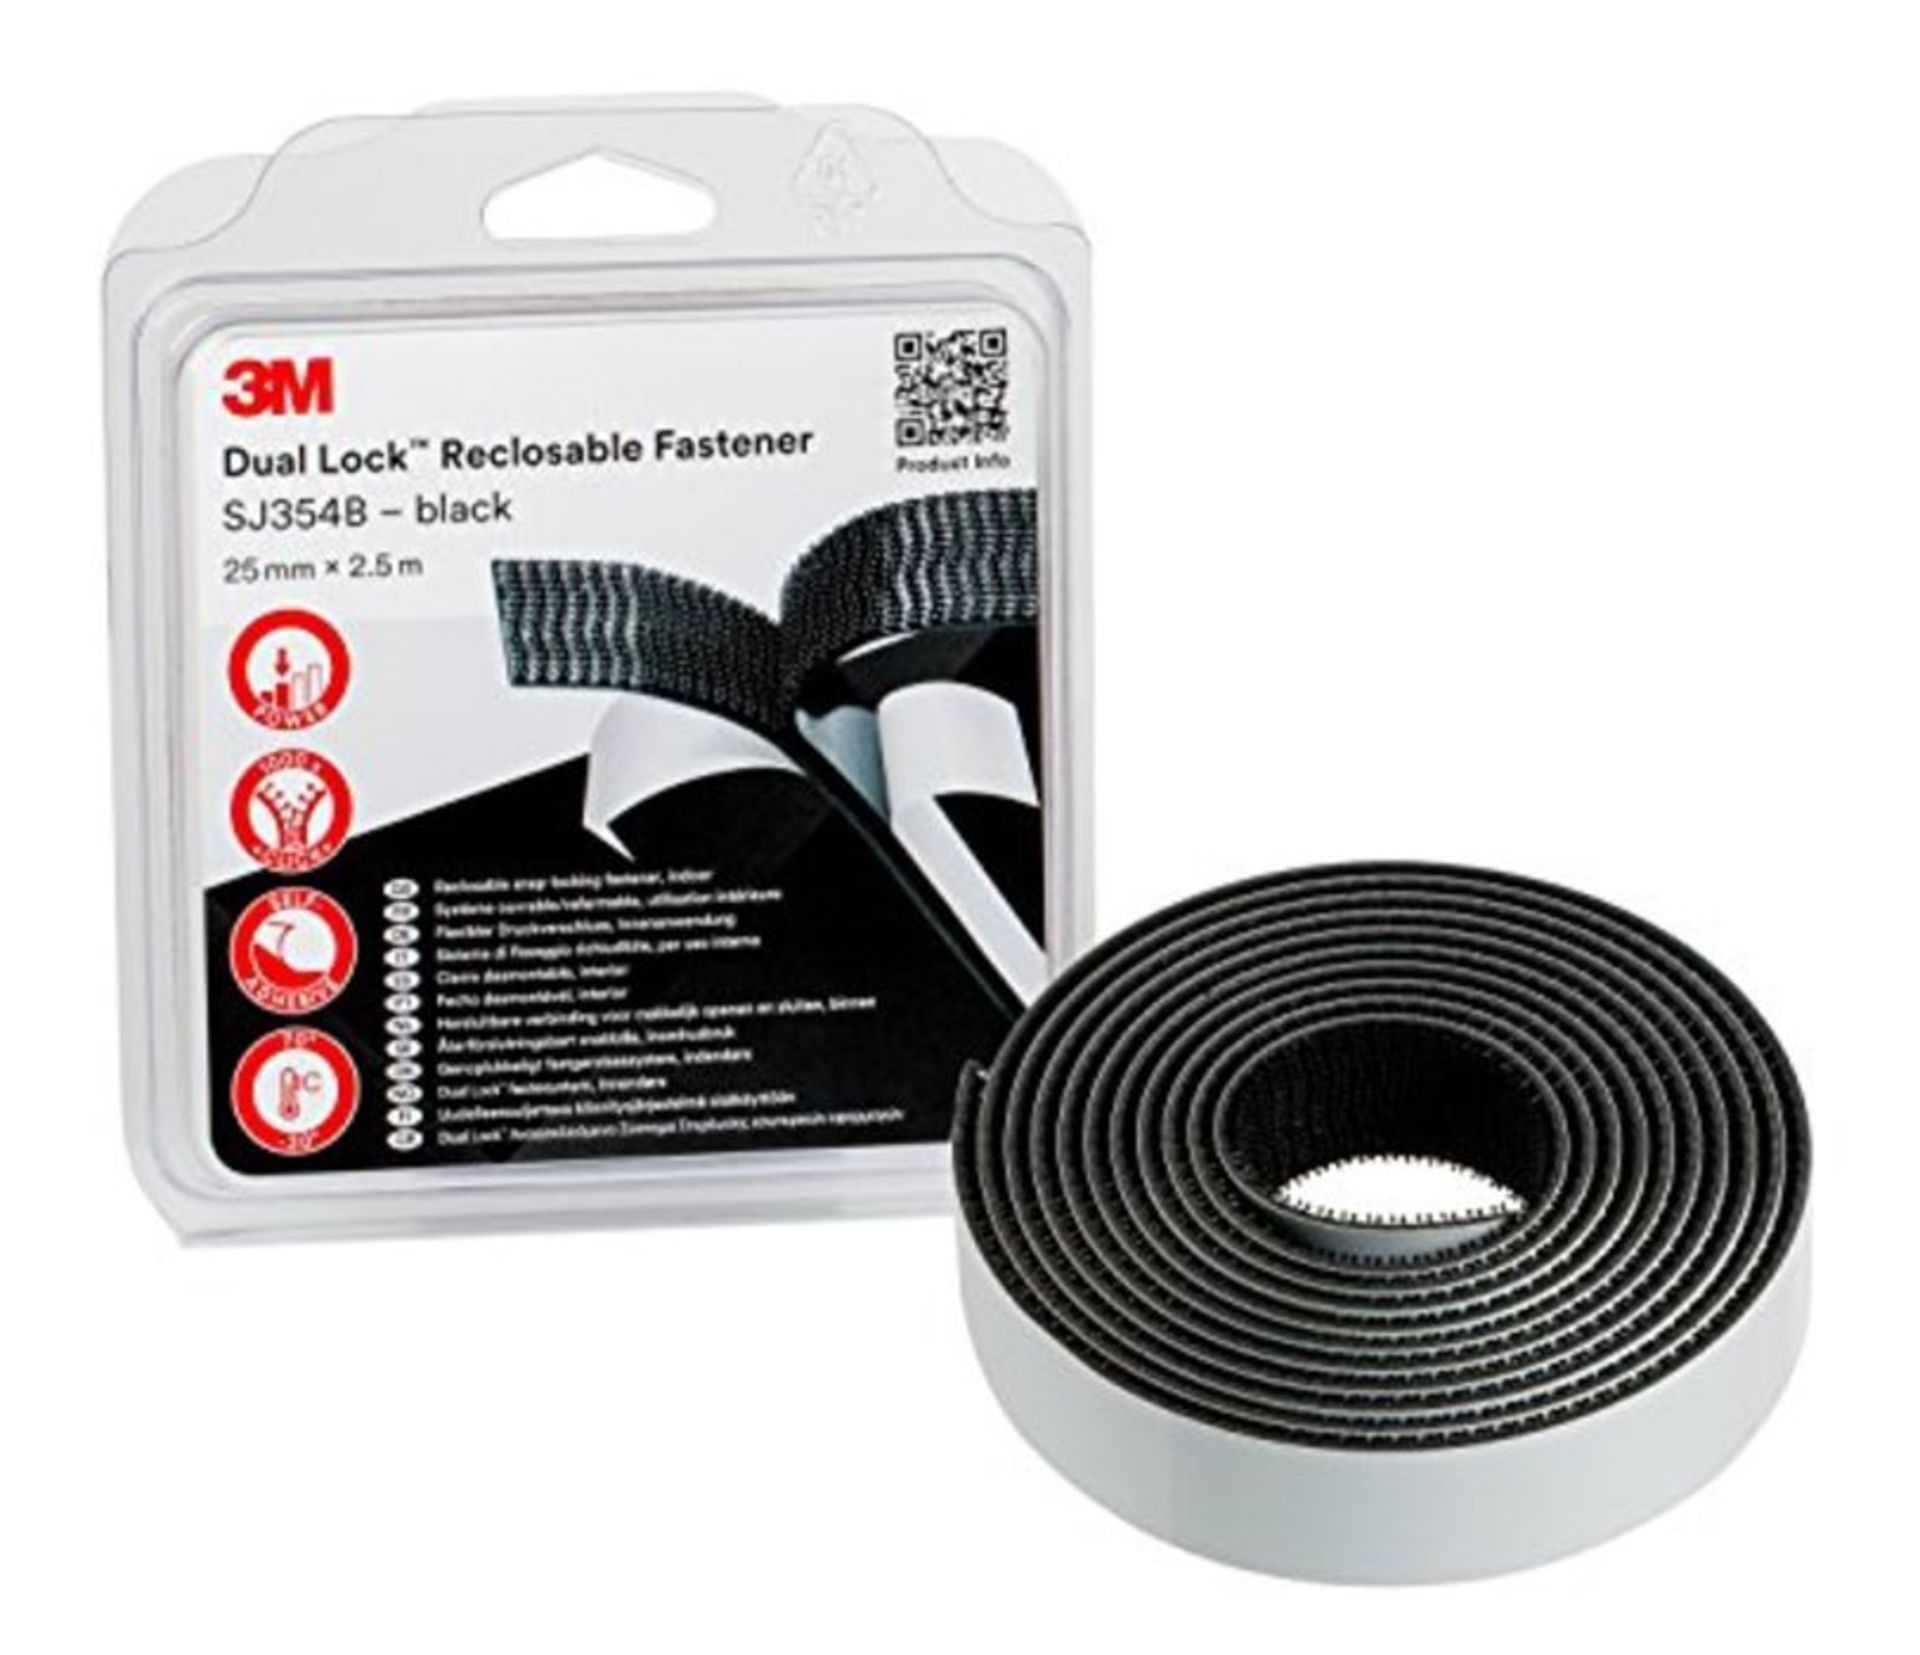 3M Dual Lock Reclosable Fastener SJ354B - bonds well to many low surface energy materi